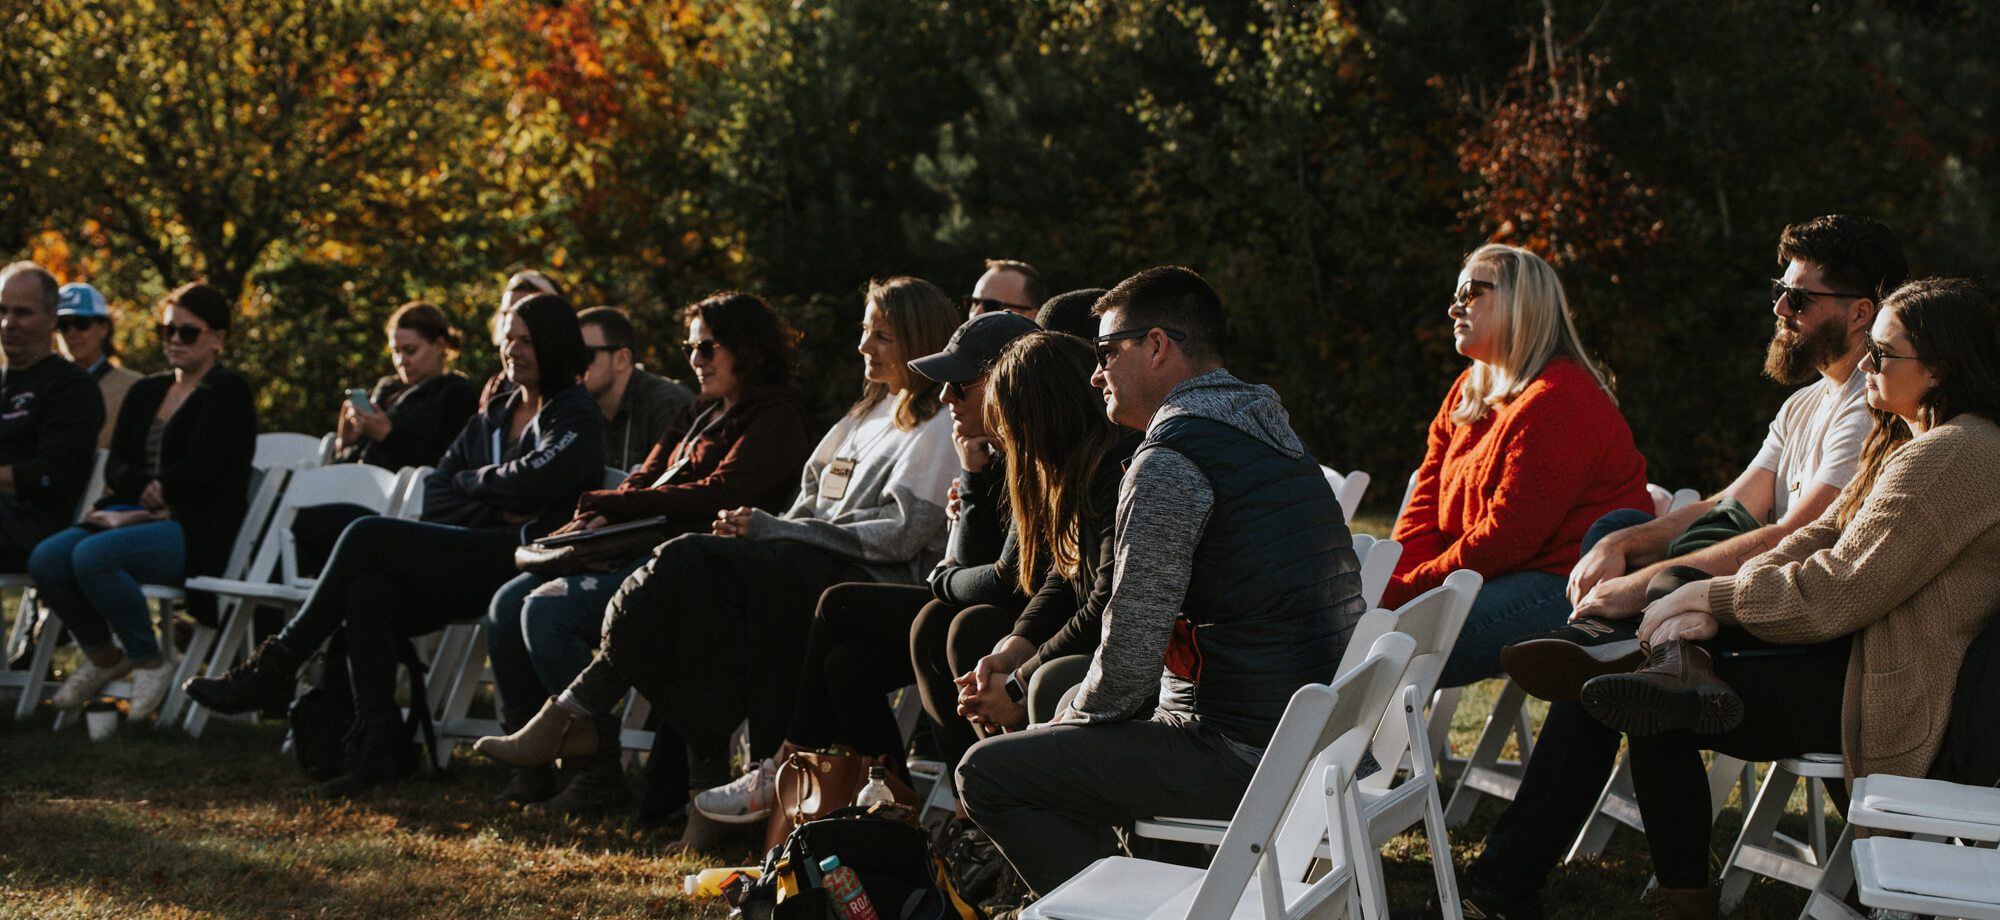 conference attendees seated in area by the pond in golden hour sunlight with foliage